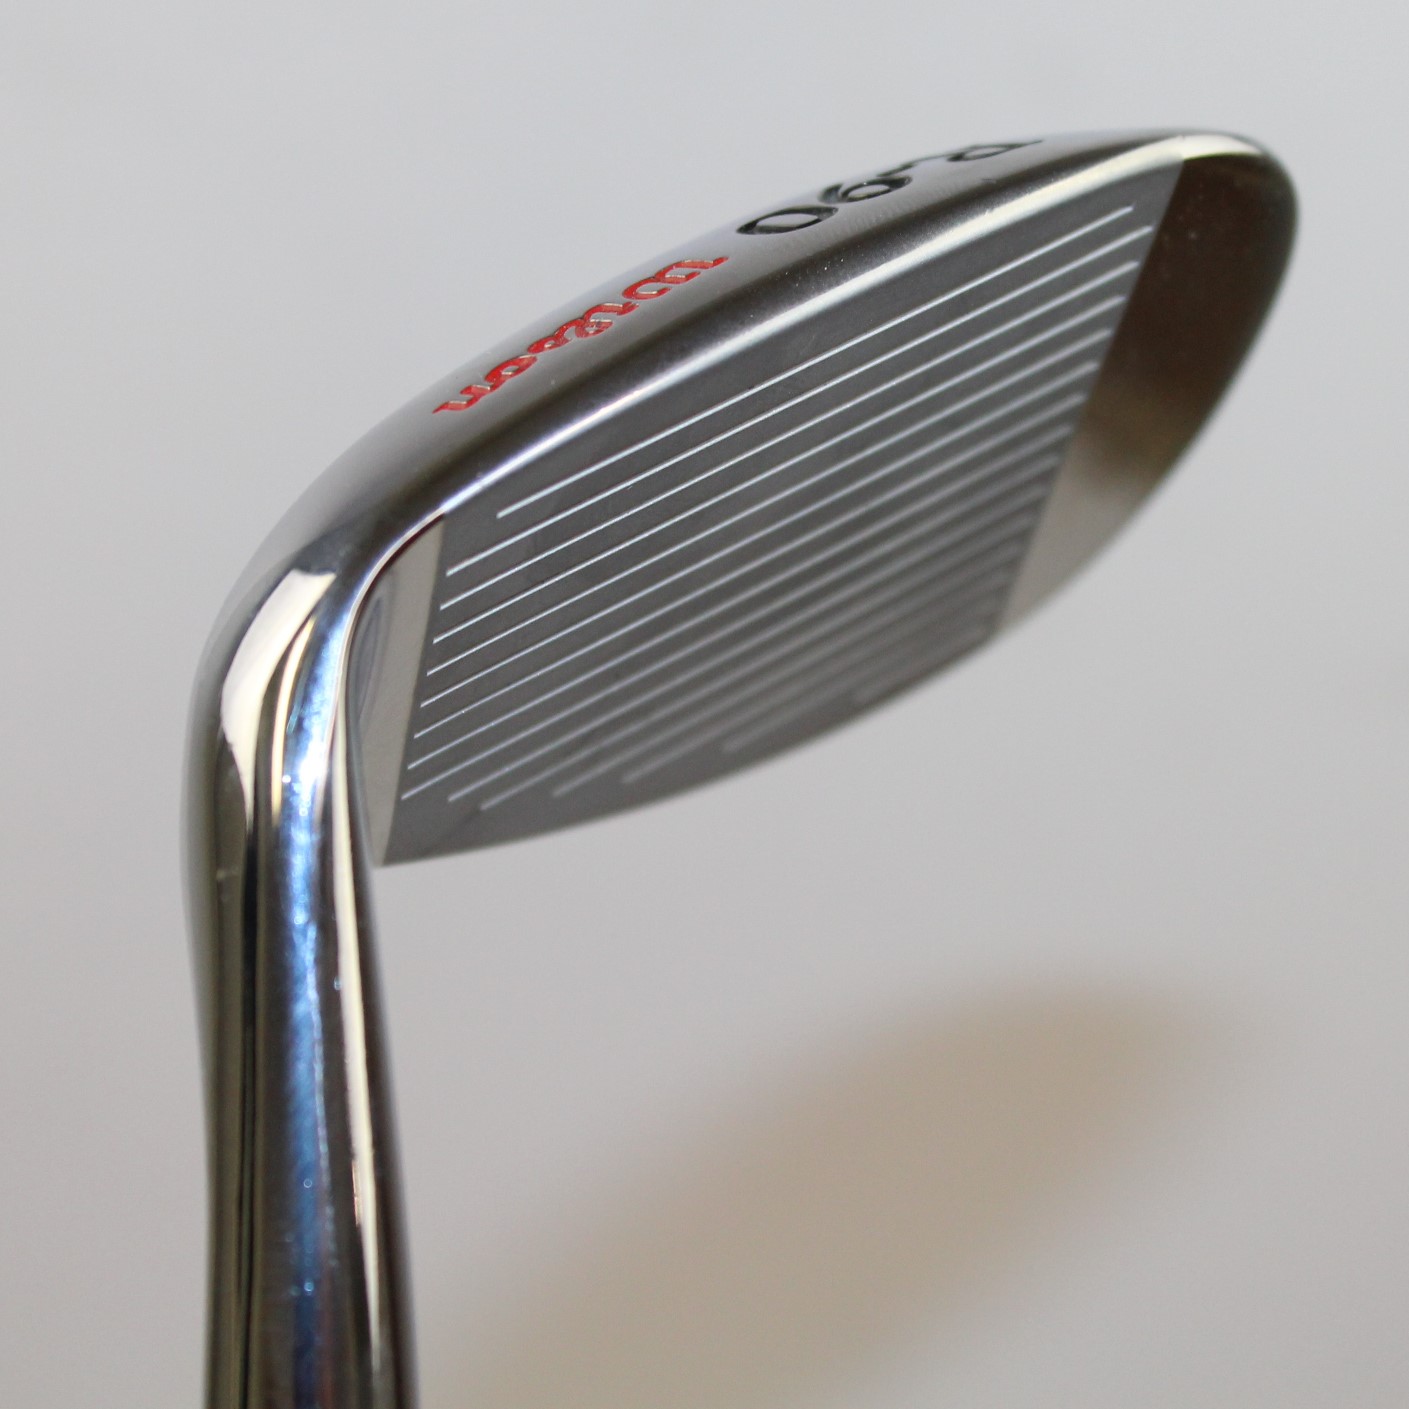 Tour pro's 30-year-old wedge deemed non-conforming by USGA